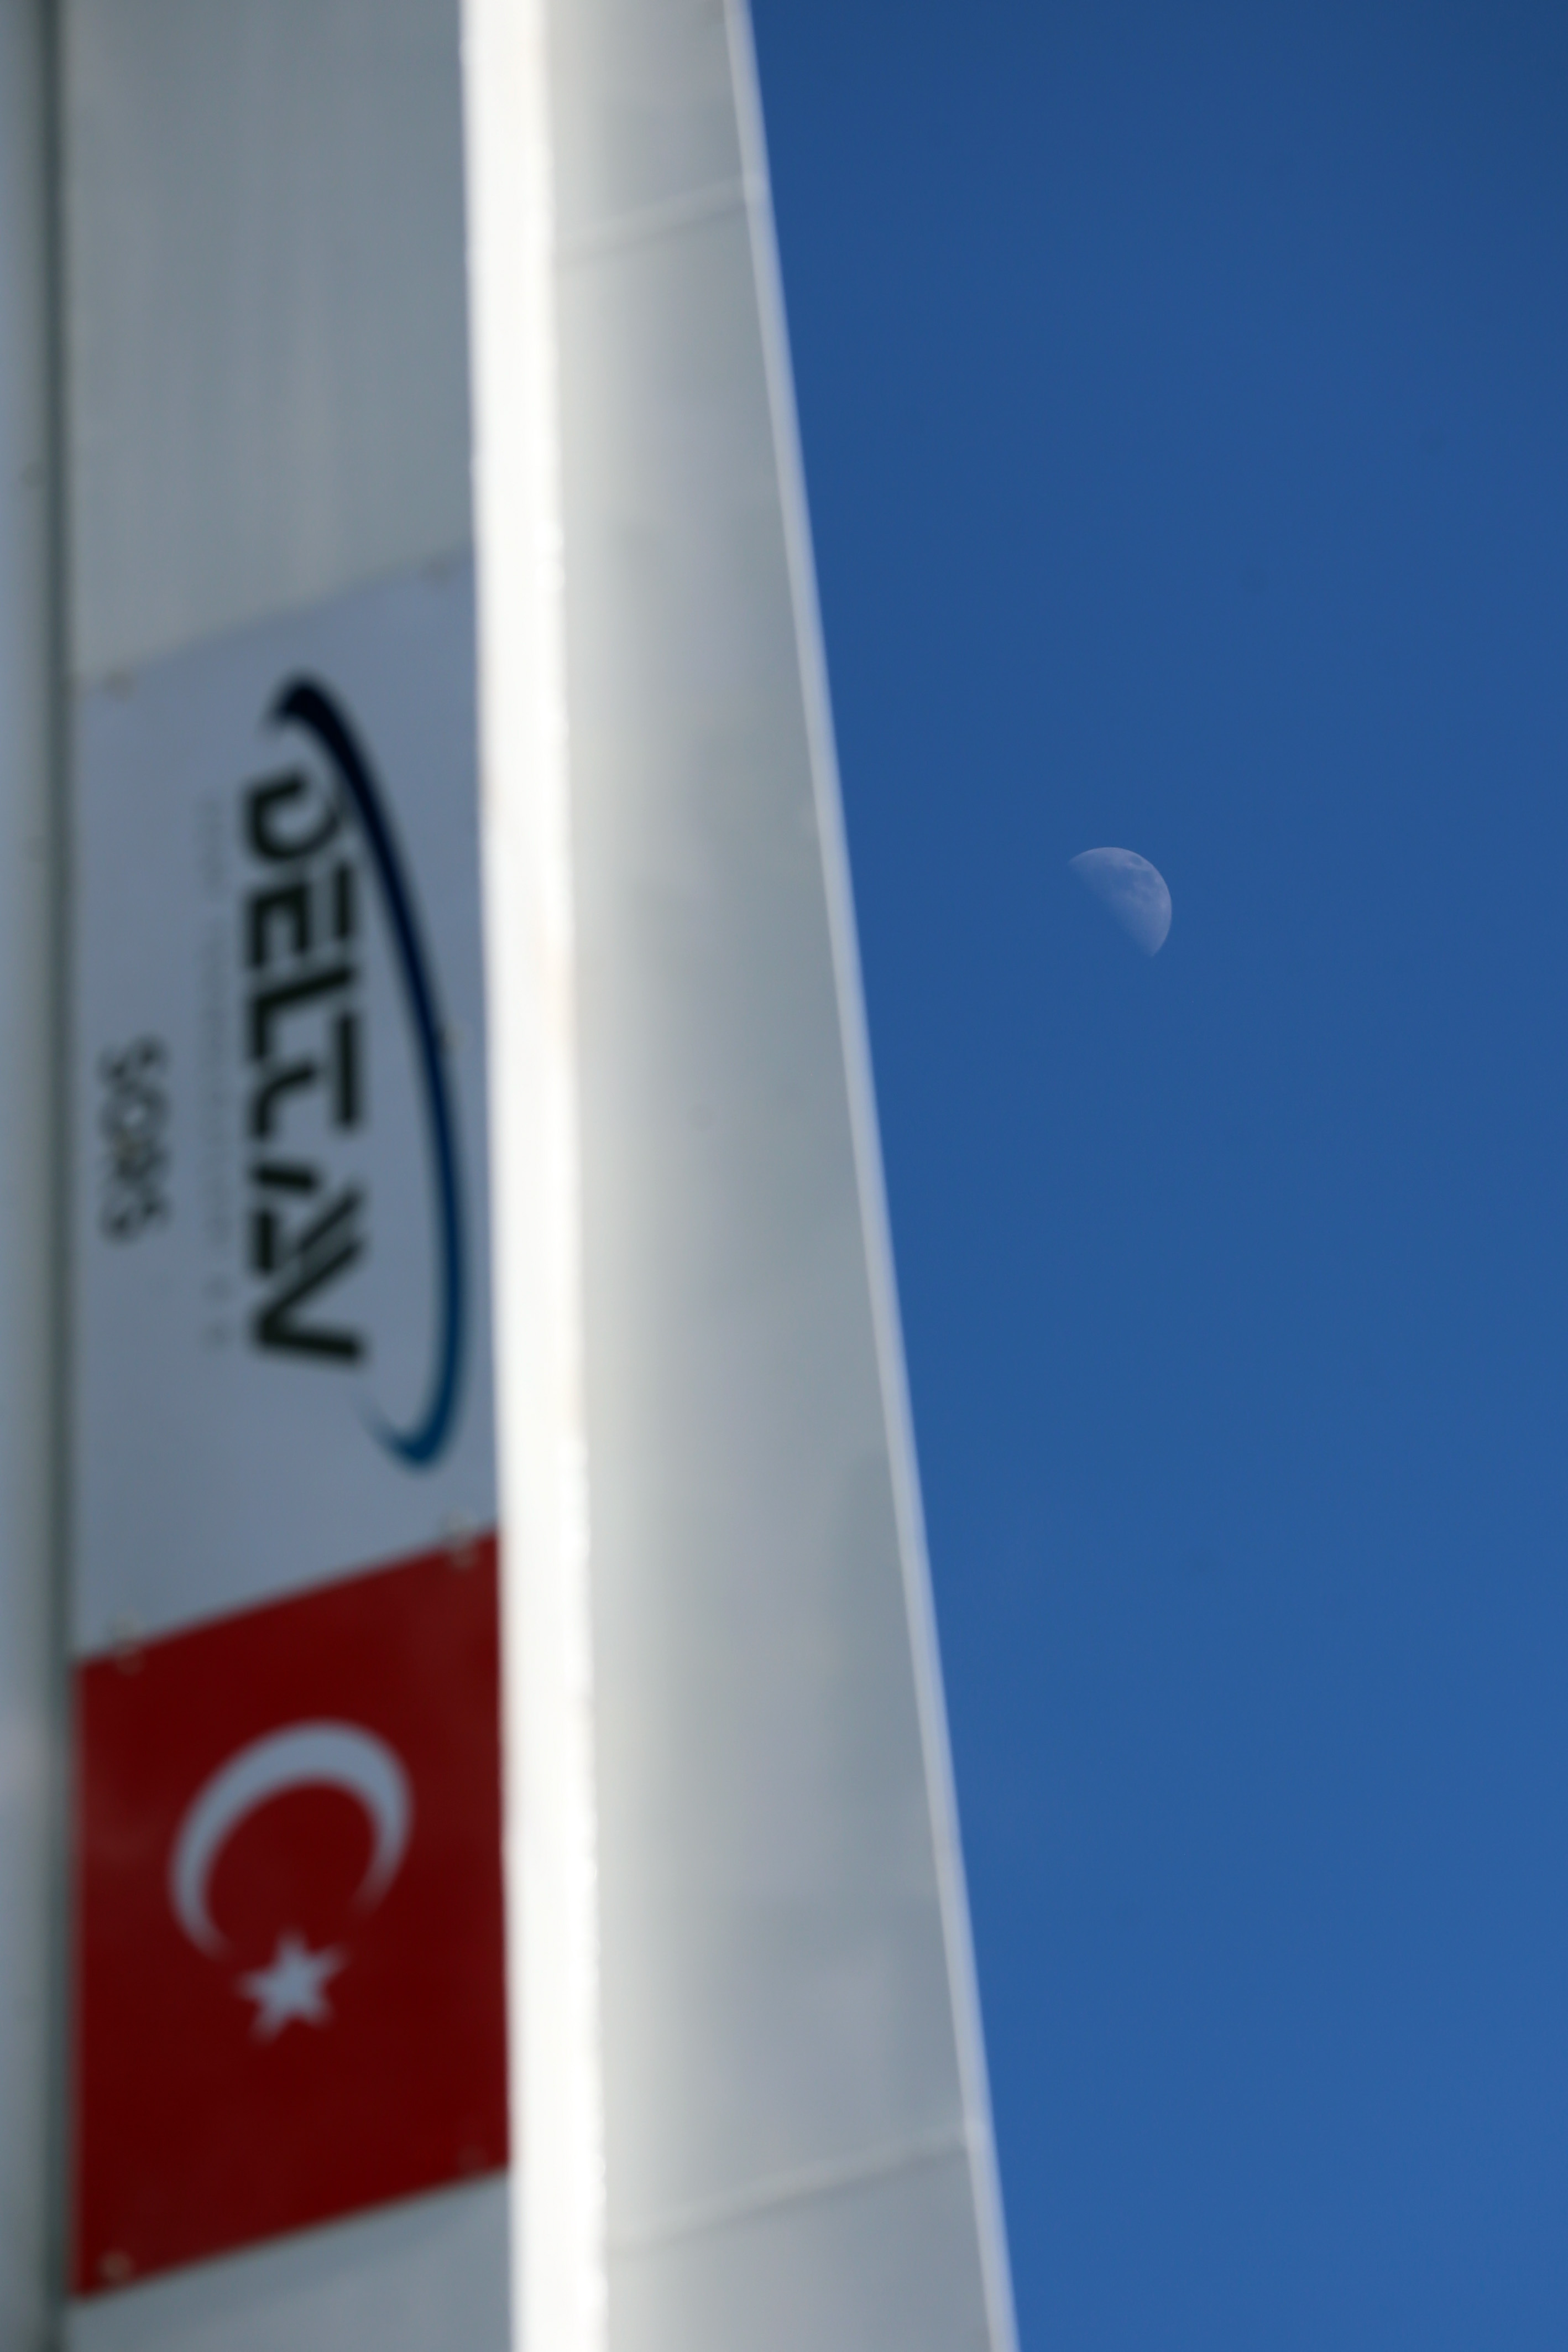 Turkey's Hybrid-powered Probe Rocket System to be used in lunar mission successfully tested